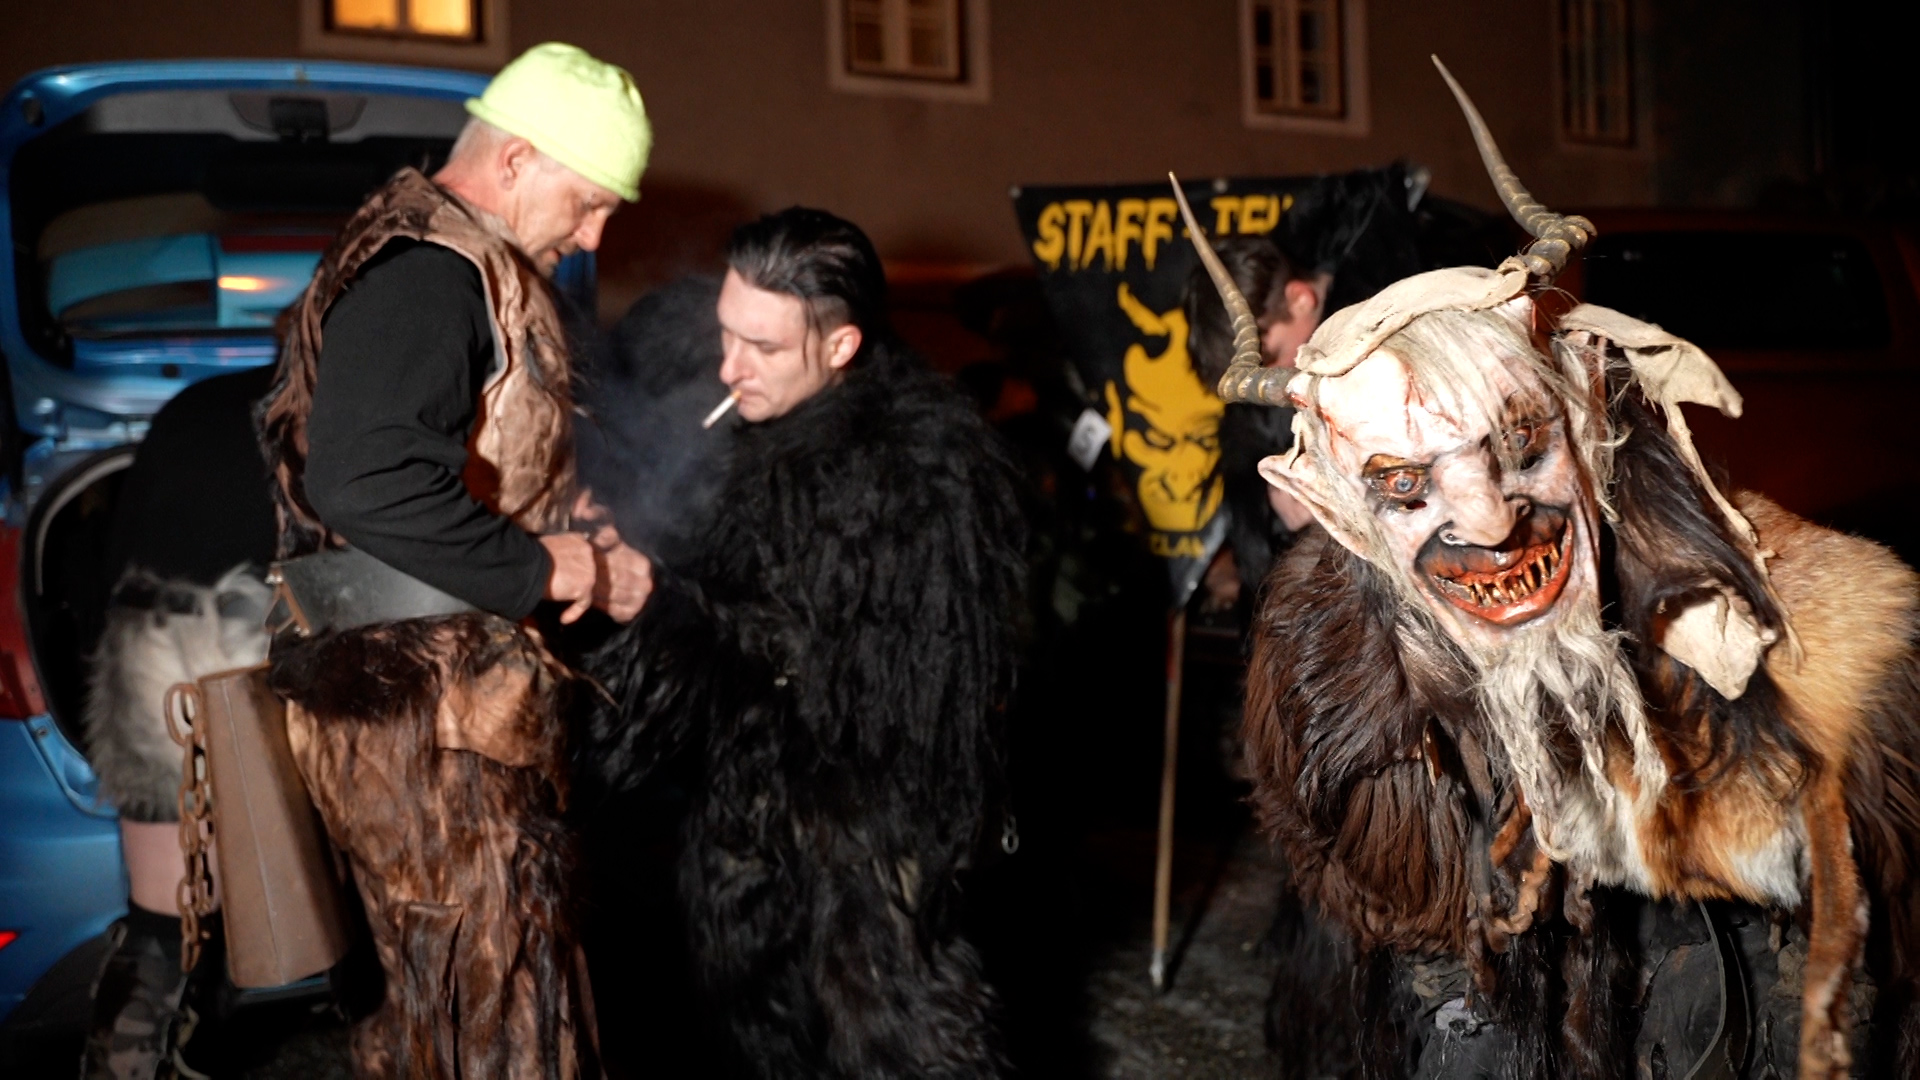 It takes about 25 hours to hand-carve a wooden Krampus mask, which costs around $800 USD. /CGTN/Andreas Gasser